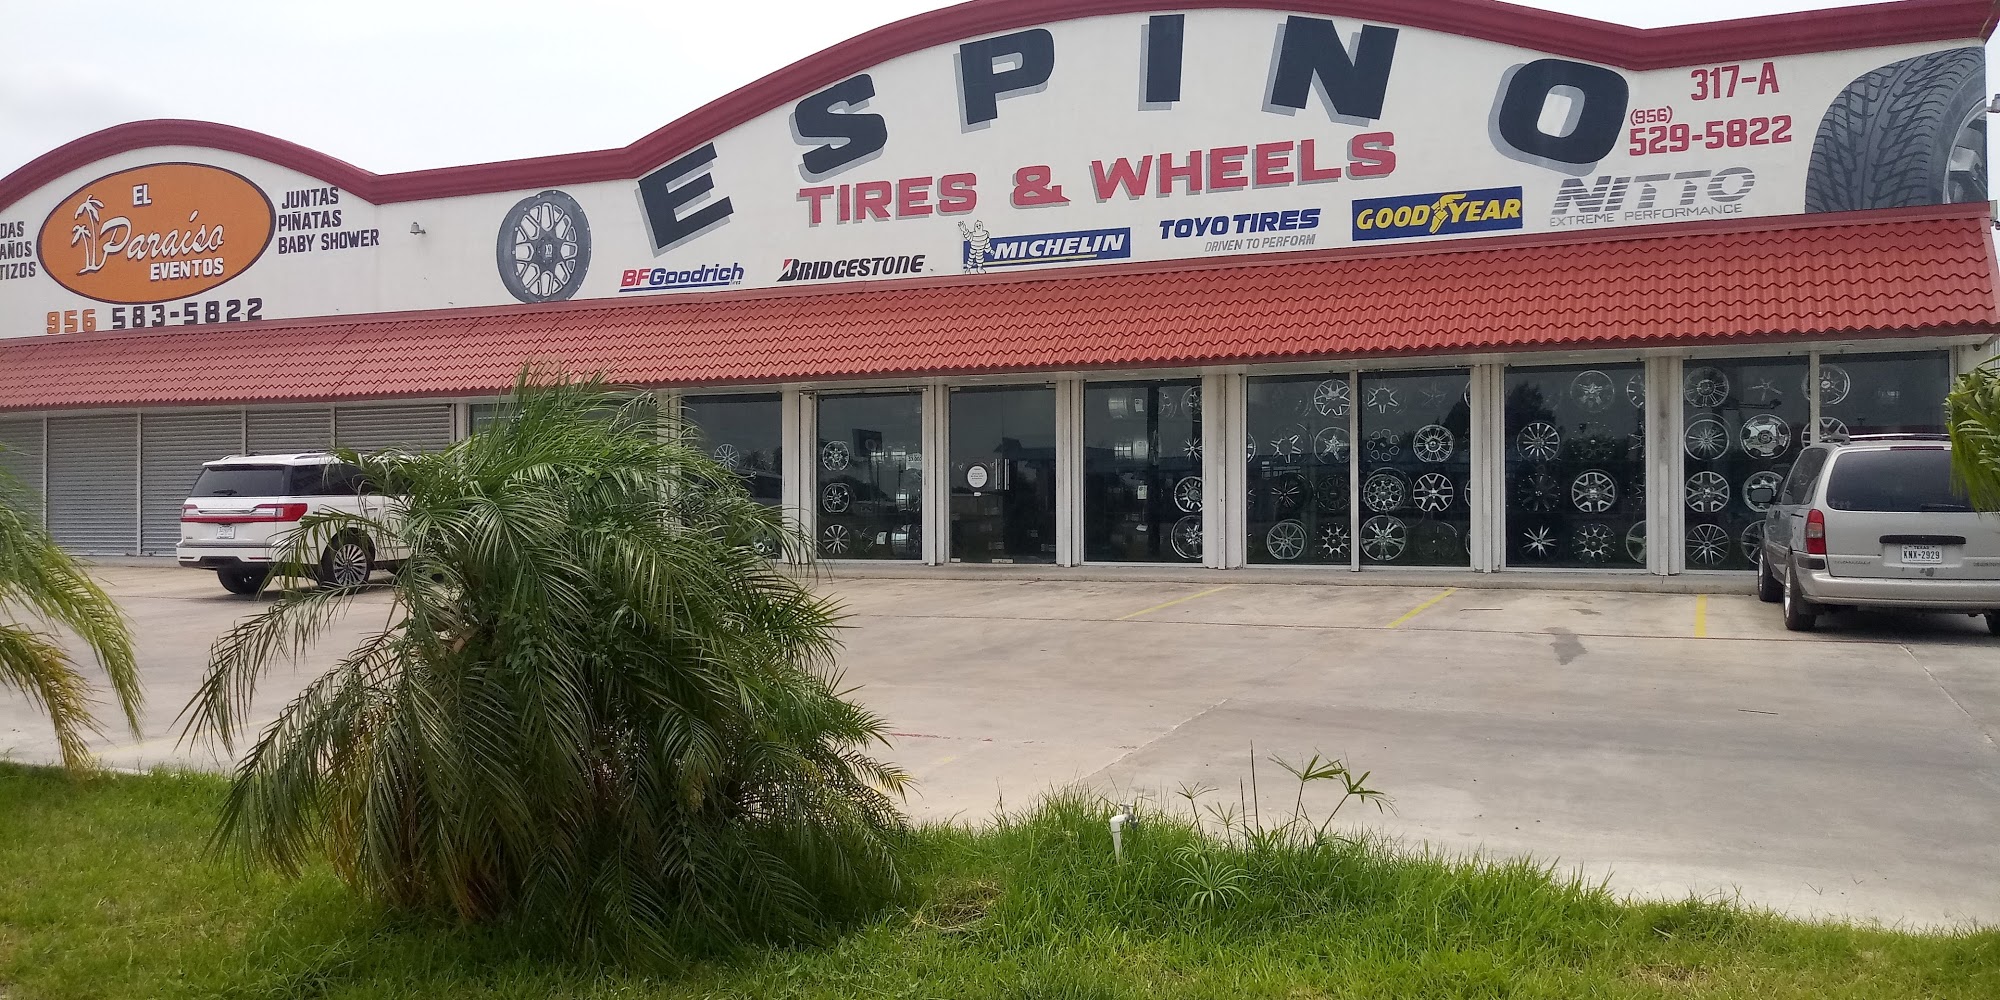 Espino Tires and Wheels